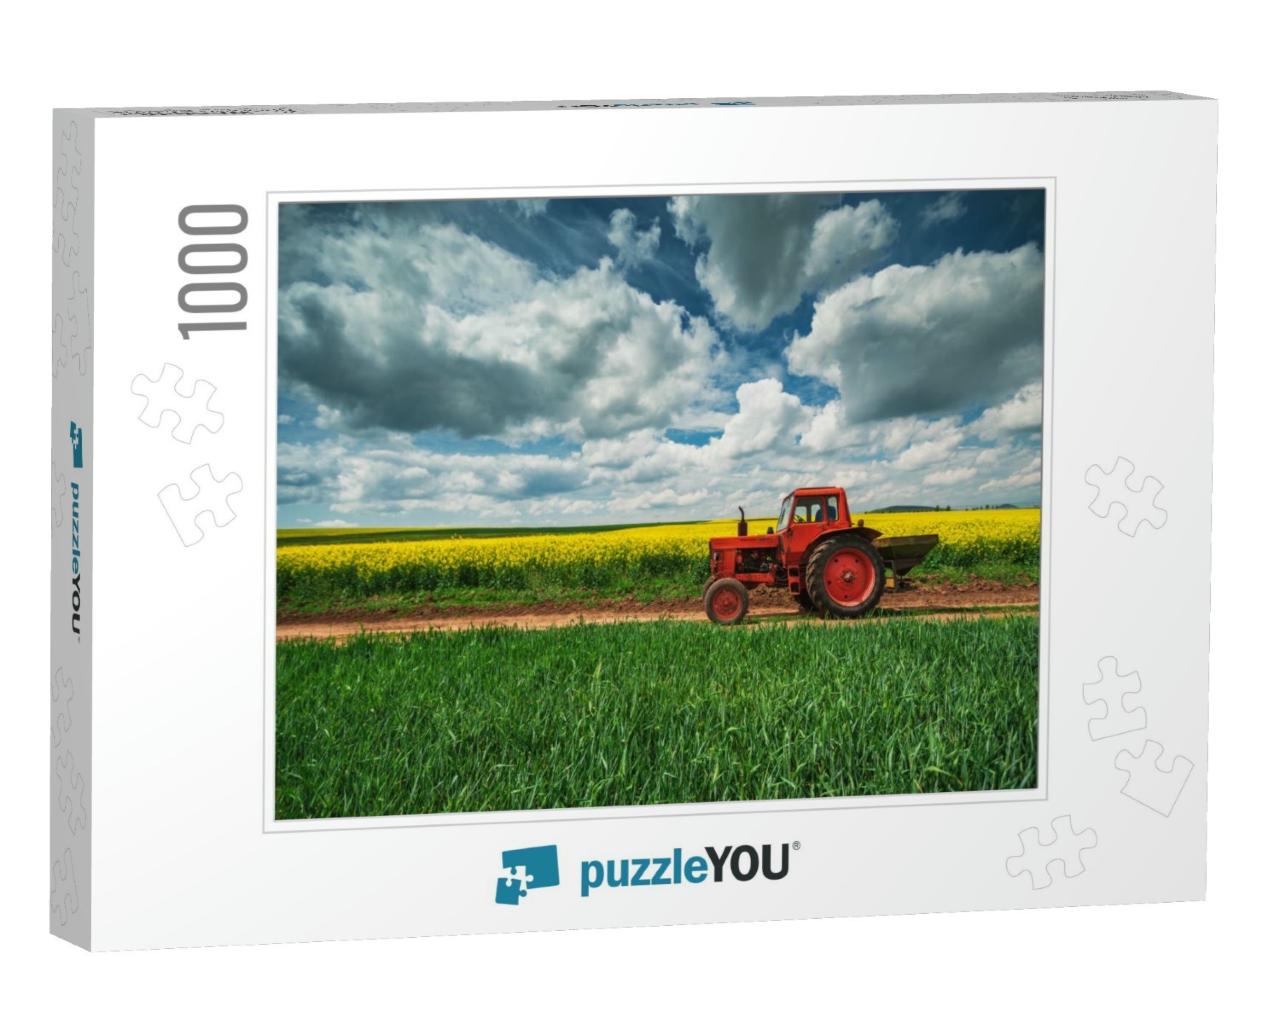 Red Tractor in a Field & Dramatic Clouds... Jigsaw Puzzle with 1000 pieces